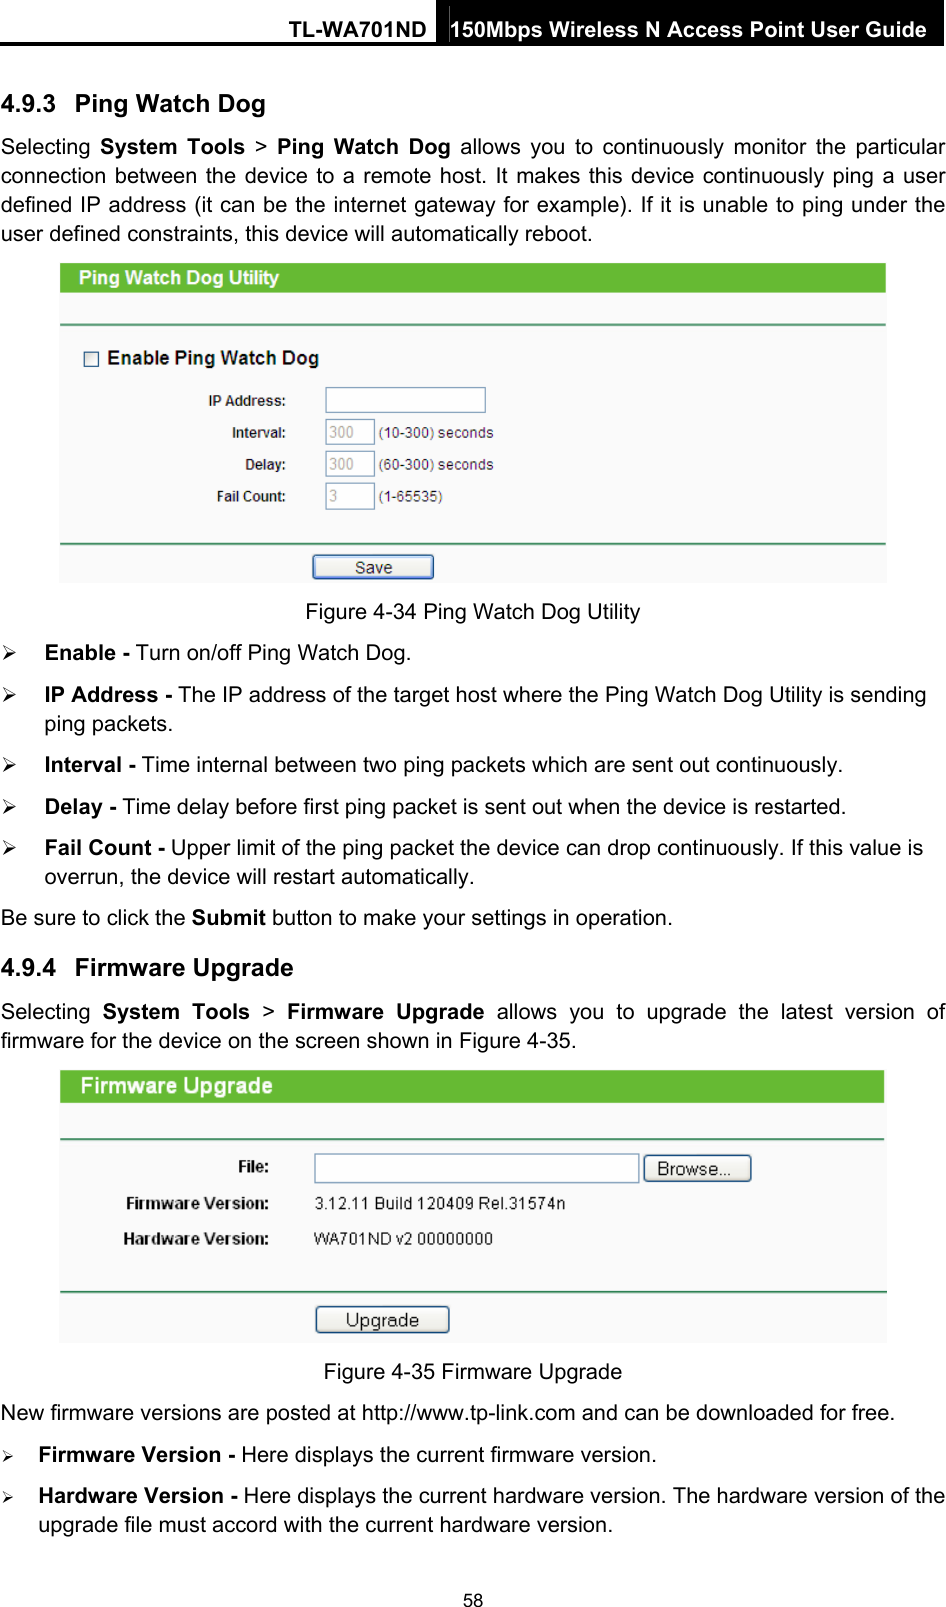 TL-WA701ND 150Mbps Wireless N Access Point User Guide 4.9.3  Ping Watch Dog Selecting  System Tools &gt; Ping Watch Dog allows you to continuously monitor the particular connection between the device to a remote host. It makes this device continuously ping a user defined IP address (it can be the internet gateway for example). If it is unable to ping under the user defined constraints, this device will automatically reboot.  Figure 4-34 Ping Watch Dog Utility ¾ Enable - Turn on/off Ping Watch Dog. ¾ IP Address - The IP address of the target host where the Ping Watch Dog Utility is sending ping packets. ¾ Interval - Time internal between two ping packets which are sent out continuously. ¾ Delay - Time delay before first ping packet is sent out when the device is restarted. ¾ Fail Count - Upper limit of the ping packet the device can drop continuously. If this value is overrun, the device will restart automatically. Be sure to click the Submit button to make your settings in operation. 4.9.4  Firmware Upgrade Selecting  System Tools &gt; Firmware Upgrade allows you to upgrade the latest version of firmware for the device on the screen shown in Figure 4-35.  Figure 4-35 Firmware Upgrade New firmware versions are posted at http://www.tp-link.com and can be downloaded for free.   ¾ Firmware Version - Here displays the current firmware version. ¾ Hardware Version - Here displays the current hardware version. The hardware version of the upgrade file must accord with the current hardware version. 58 